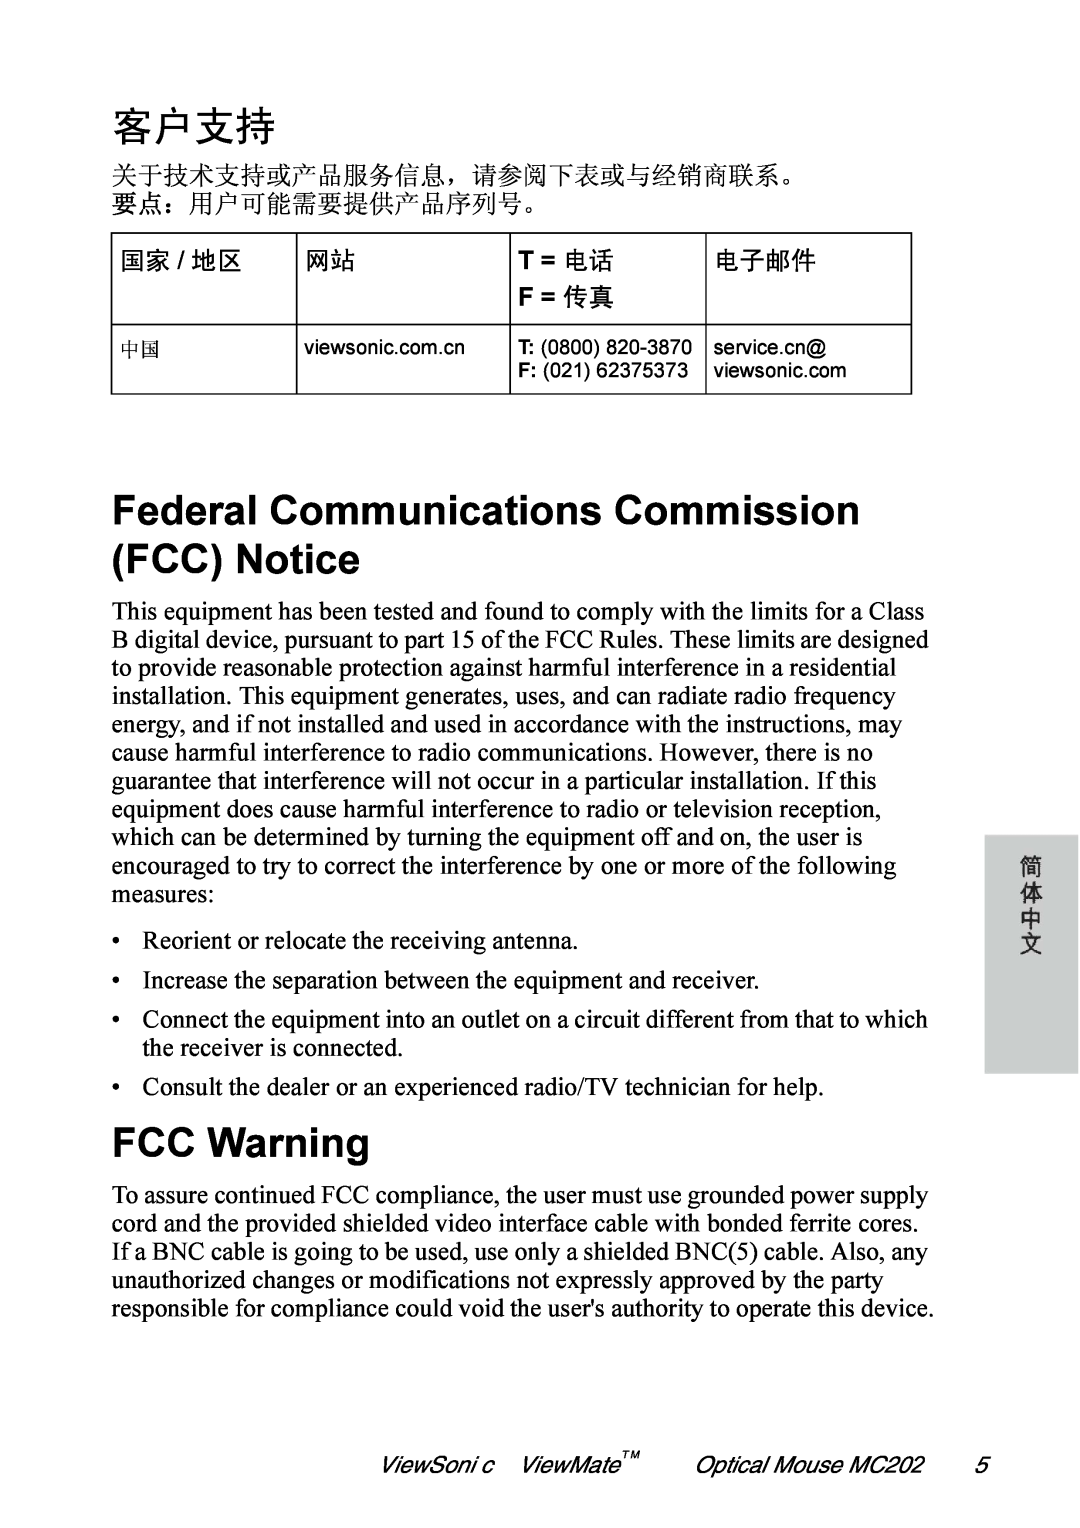 ViewSonic MC202P manual Federal Communications Commission FCC Notice, FCC Warning 